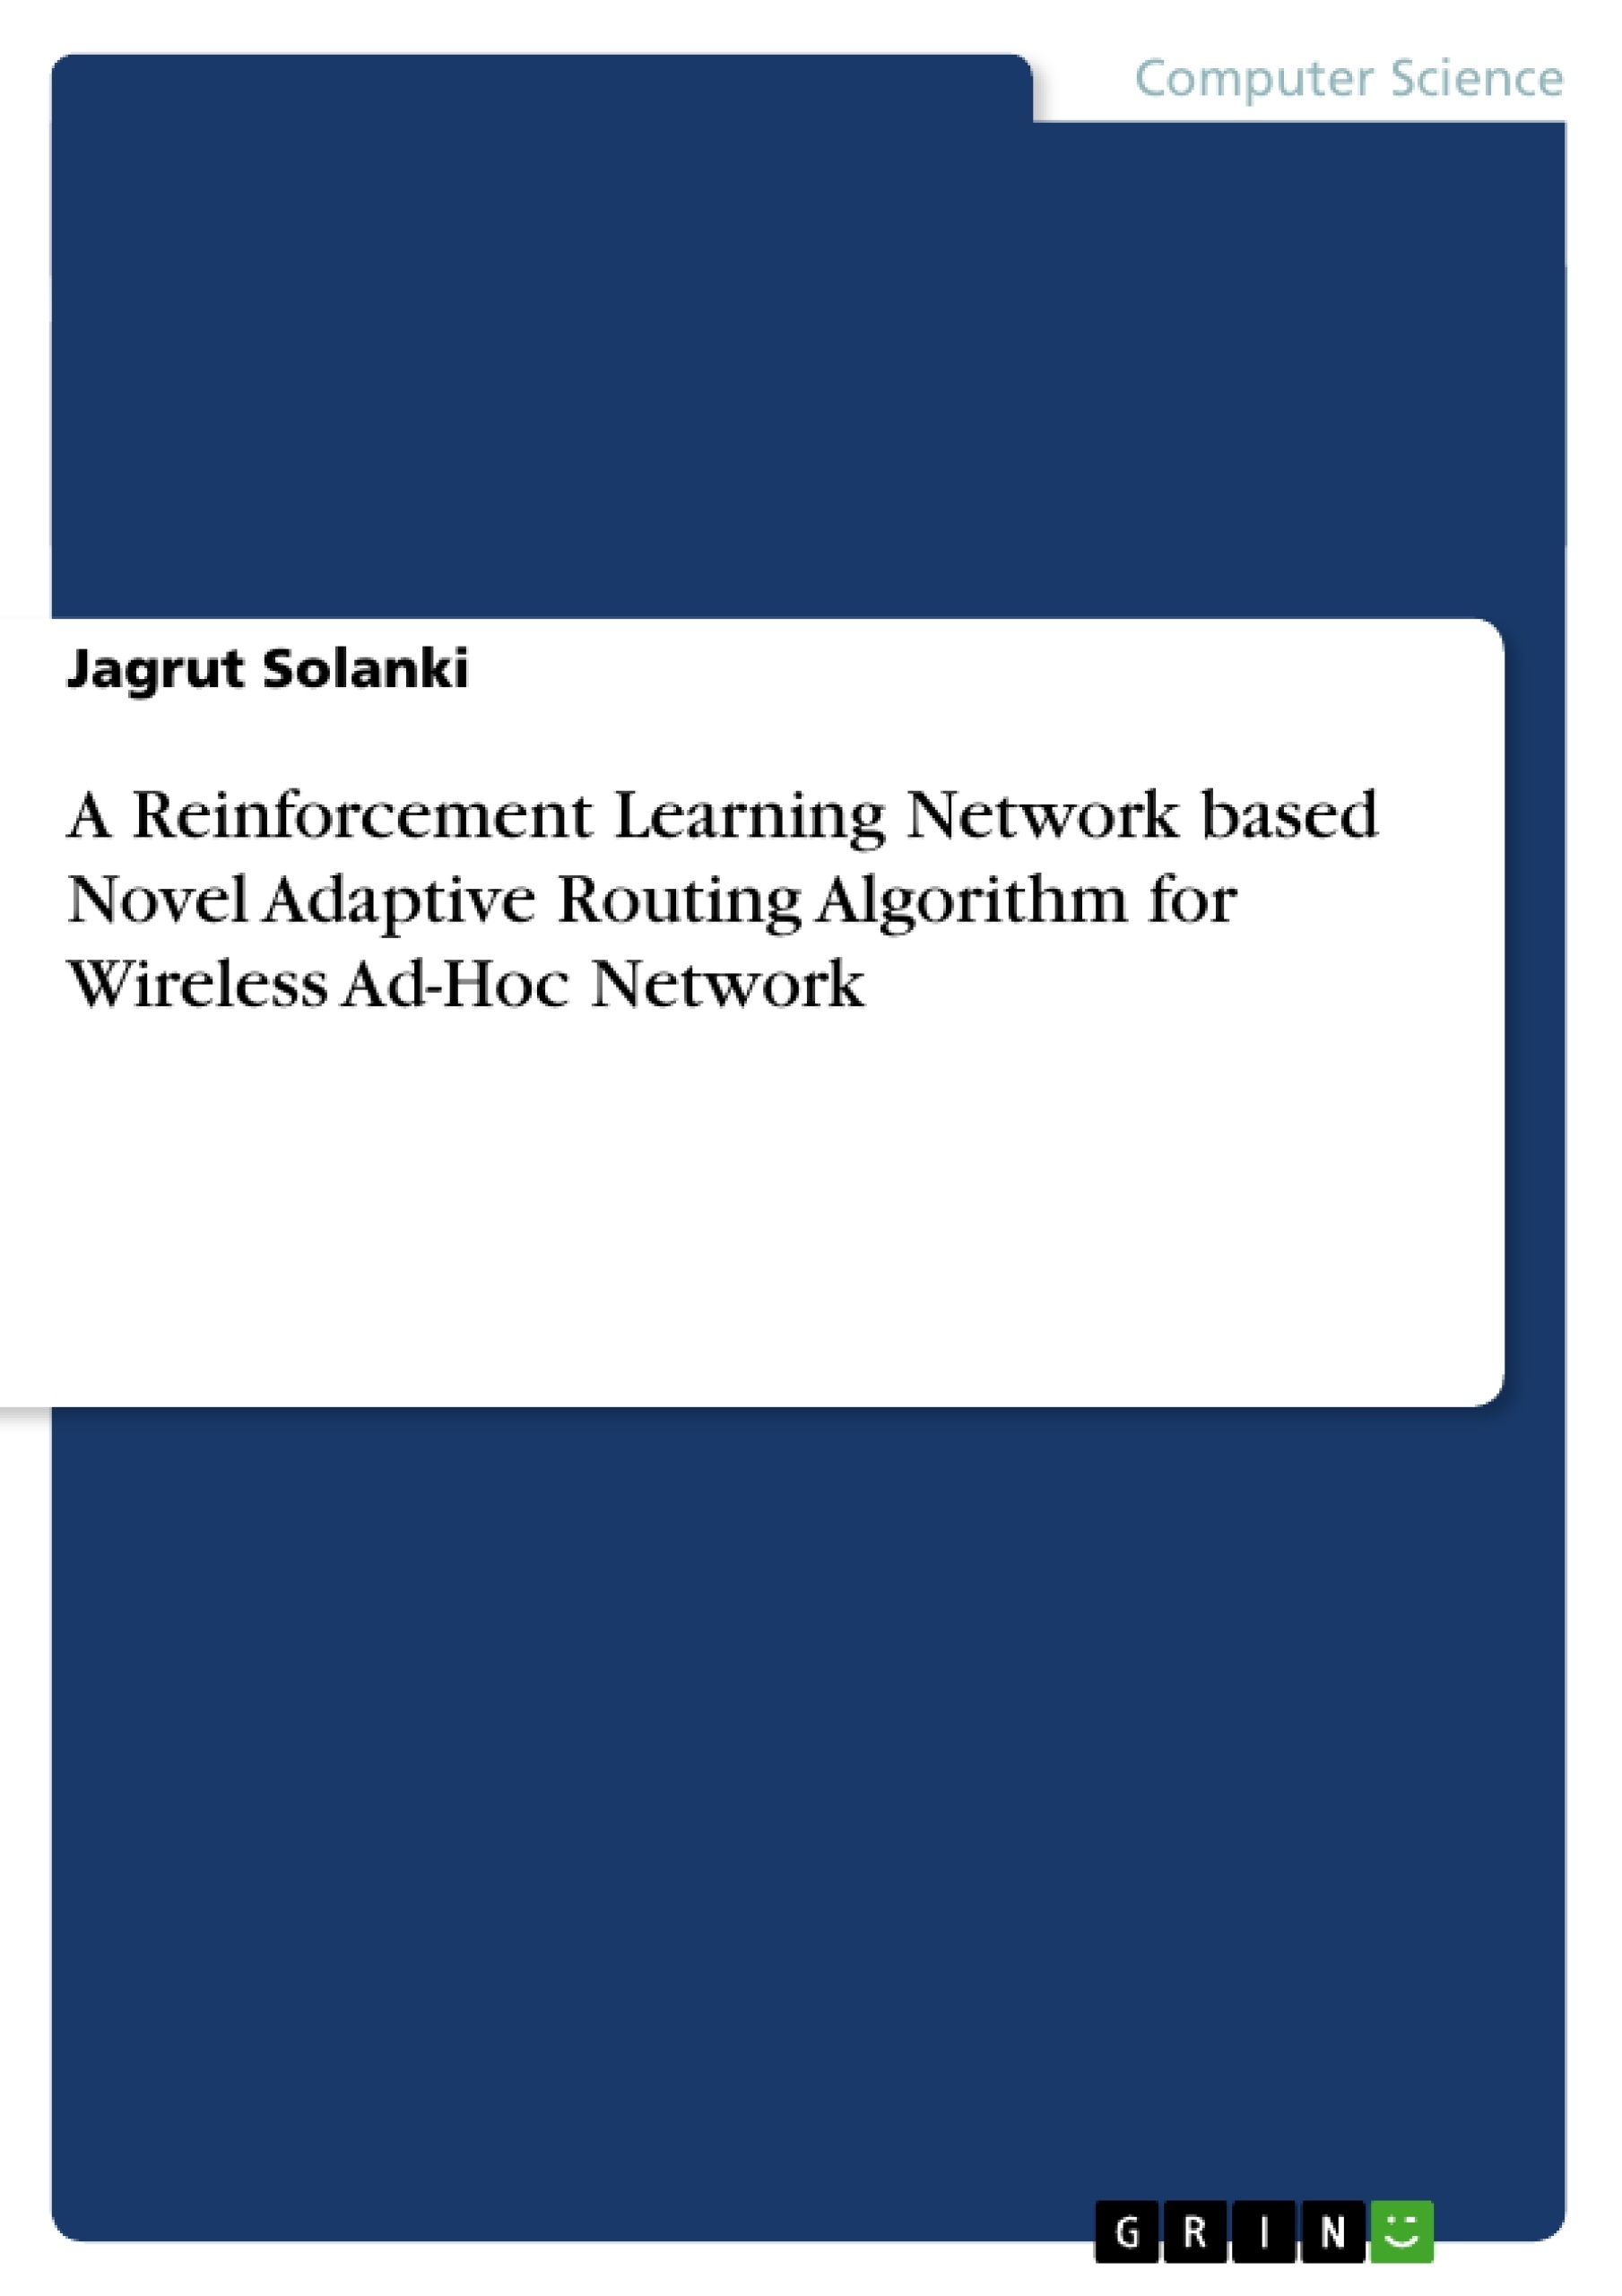 Titre: A Reinforcement Learning Network based Novel Adaptive Routing Algorithm for Wireless Ad-Hoc Network